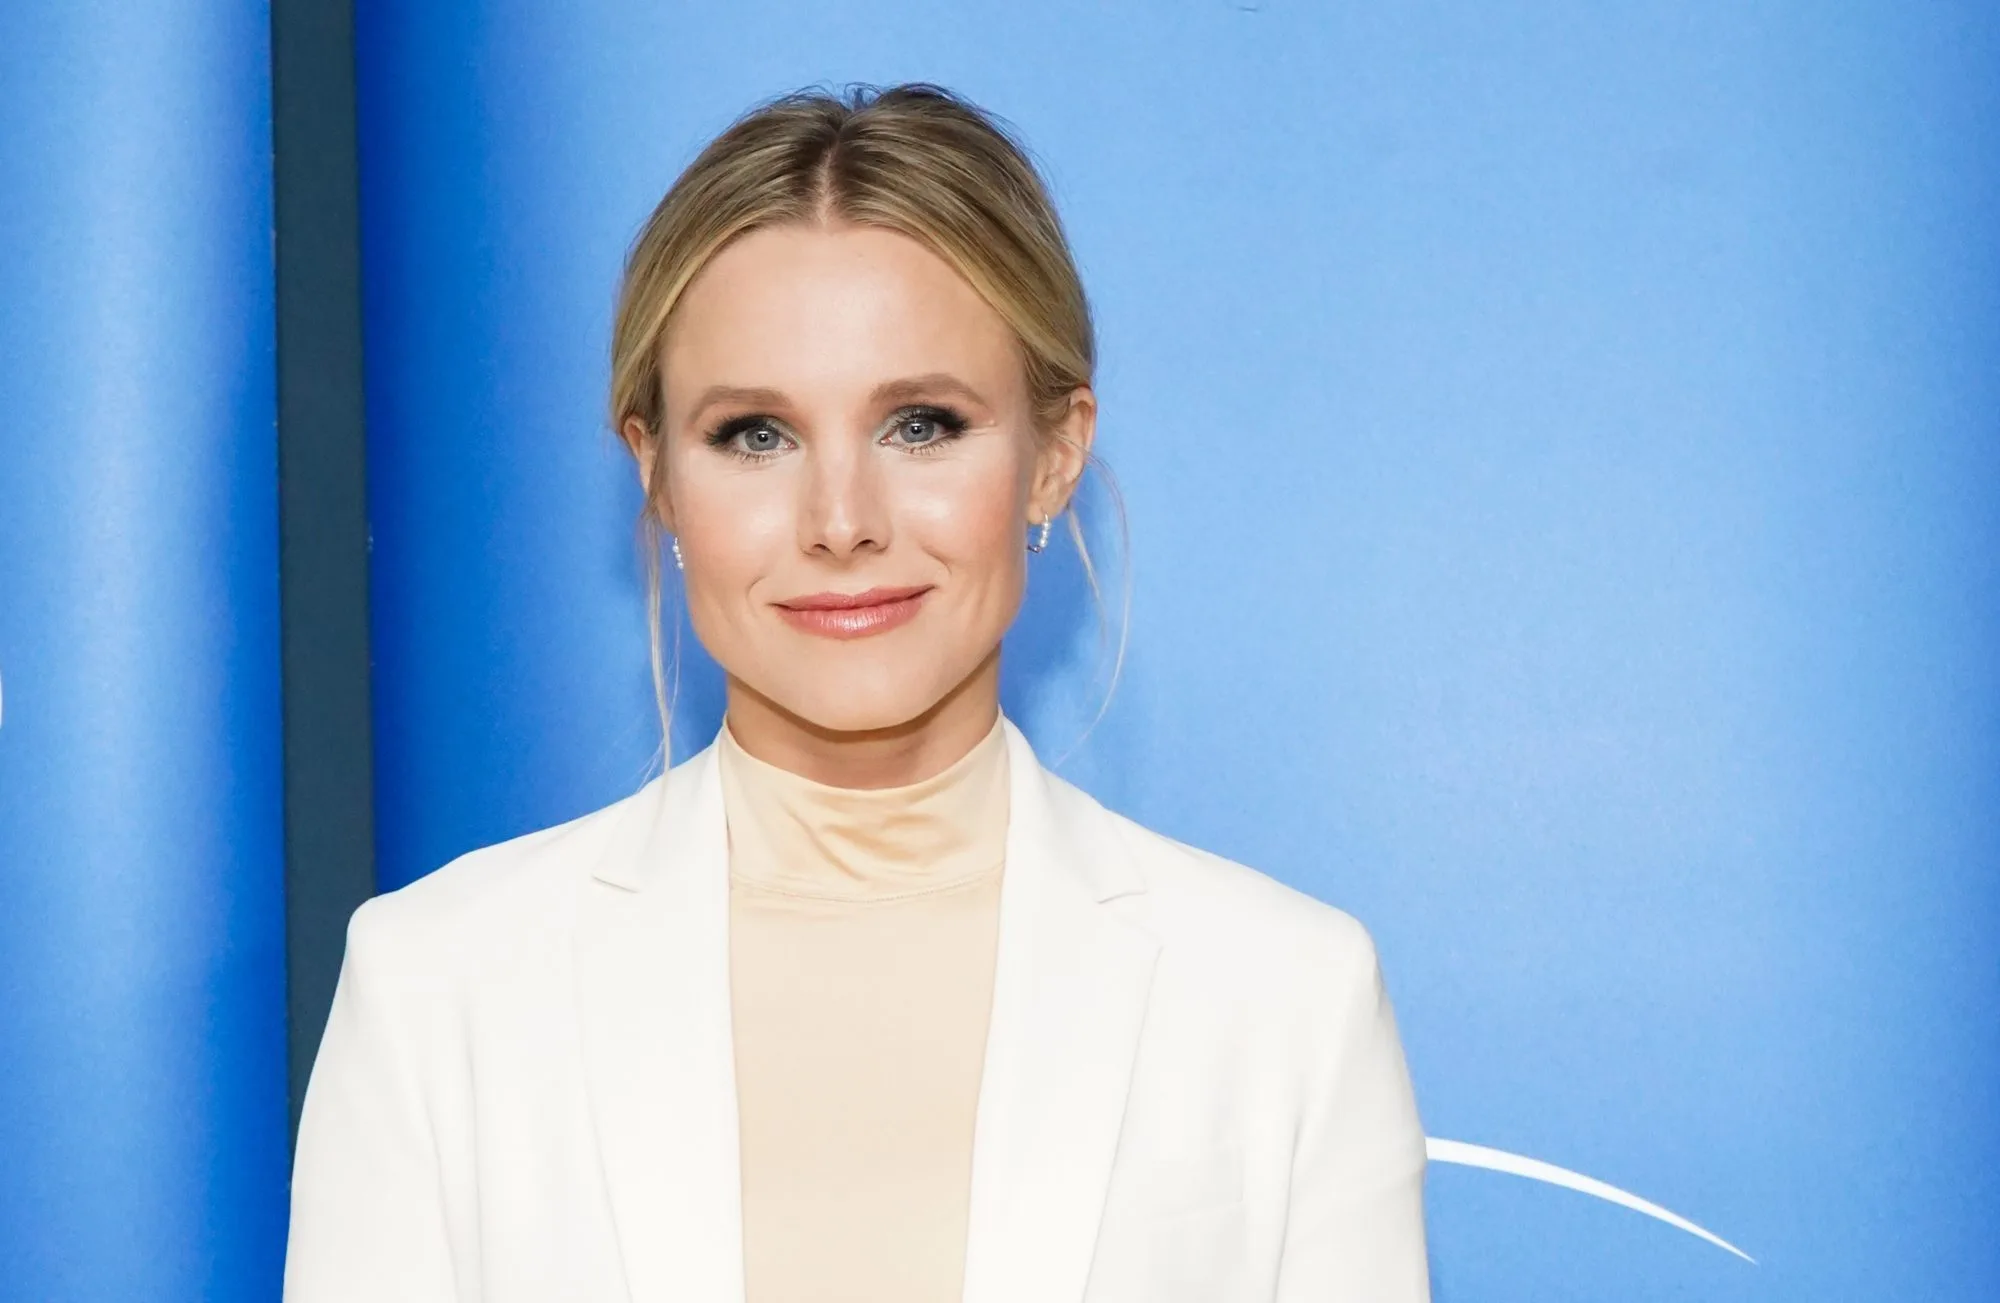 Snacking All Day? You Might Need Carbs Like Kristen Bell